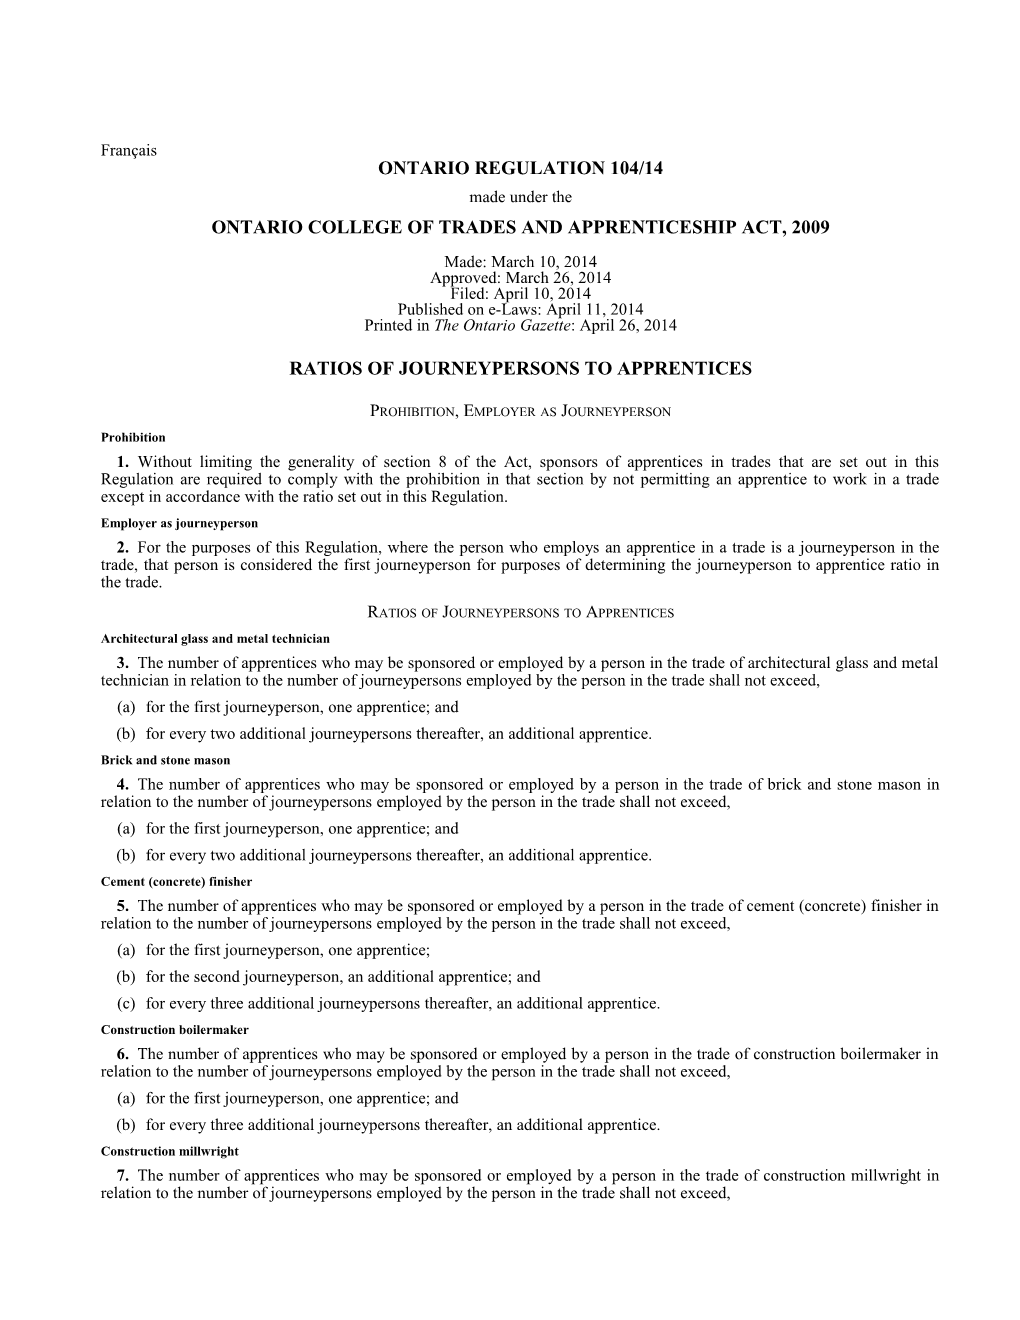 ONTARIO COLLEGE of TRADES and APPRENTICESHIP ACT, 2009 - O. Reg. 104/14